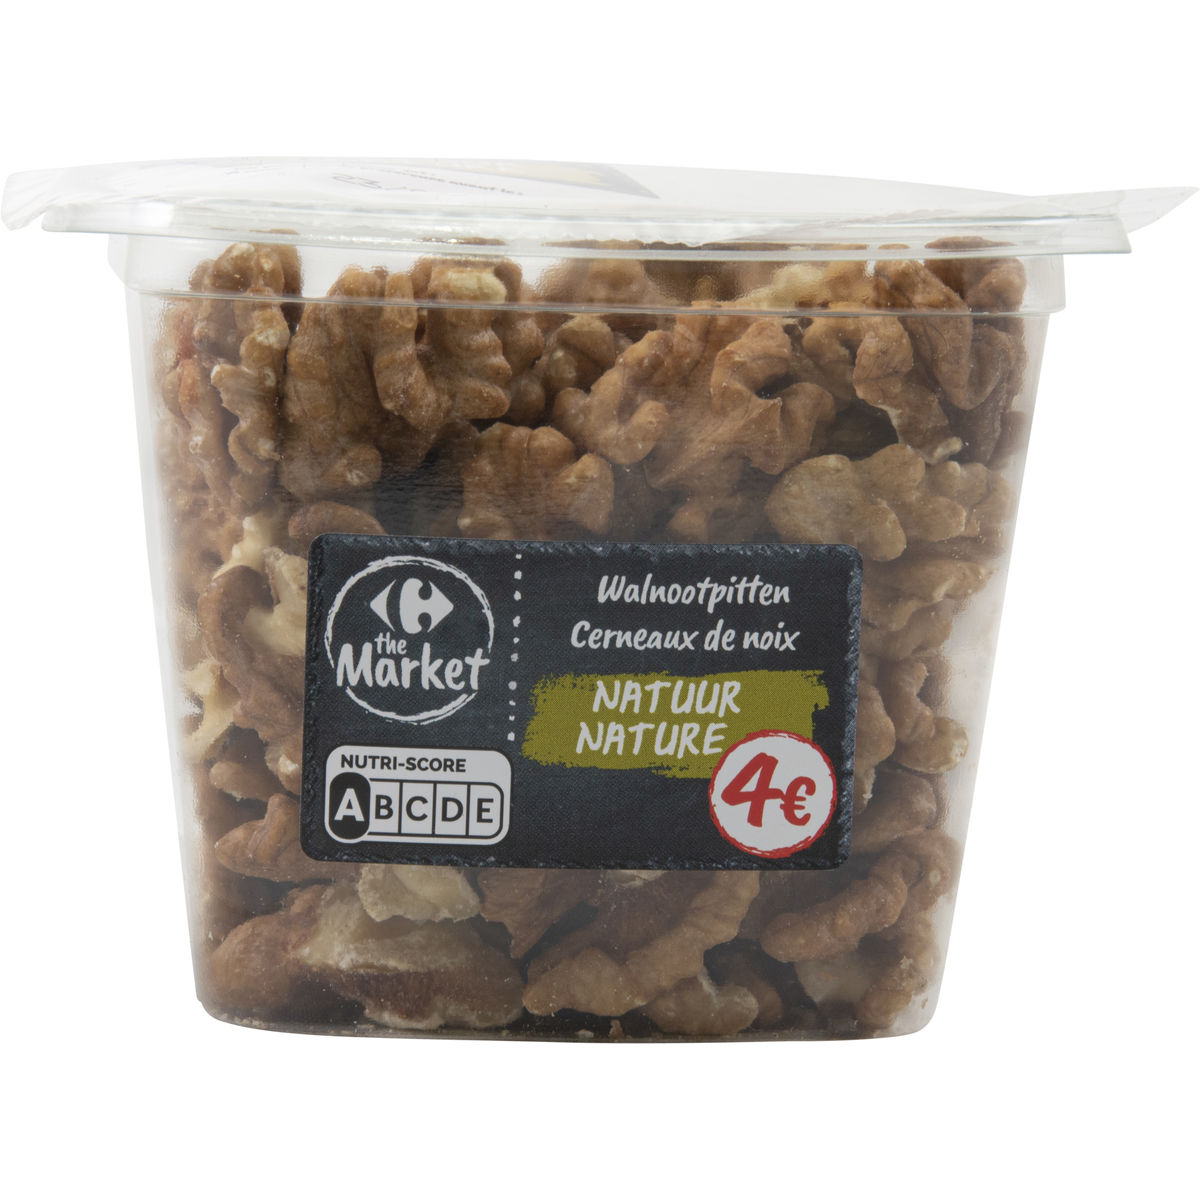 Carrefour The Market Nuts & Fruits Walnootpitten Natuur 150 g